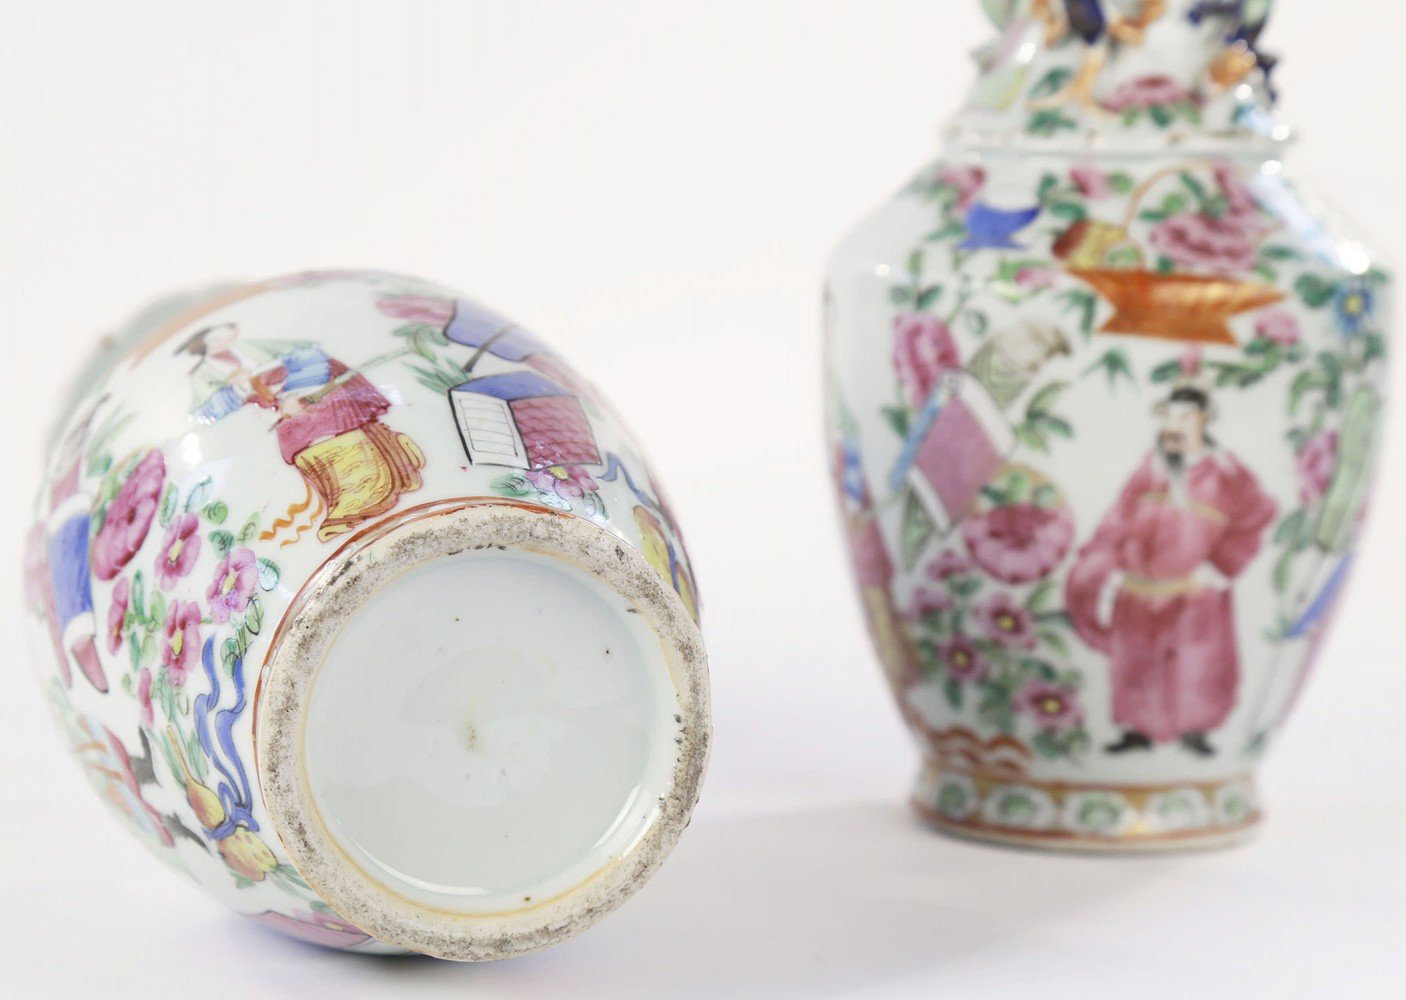 Pair of Chinese Export Polychrome Porcelain Vases